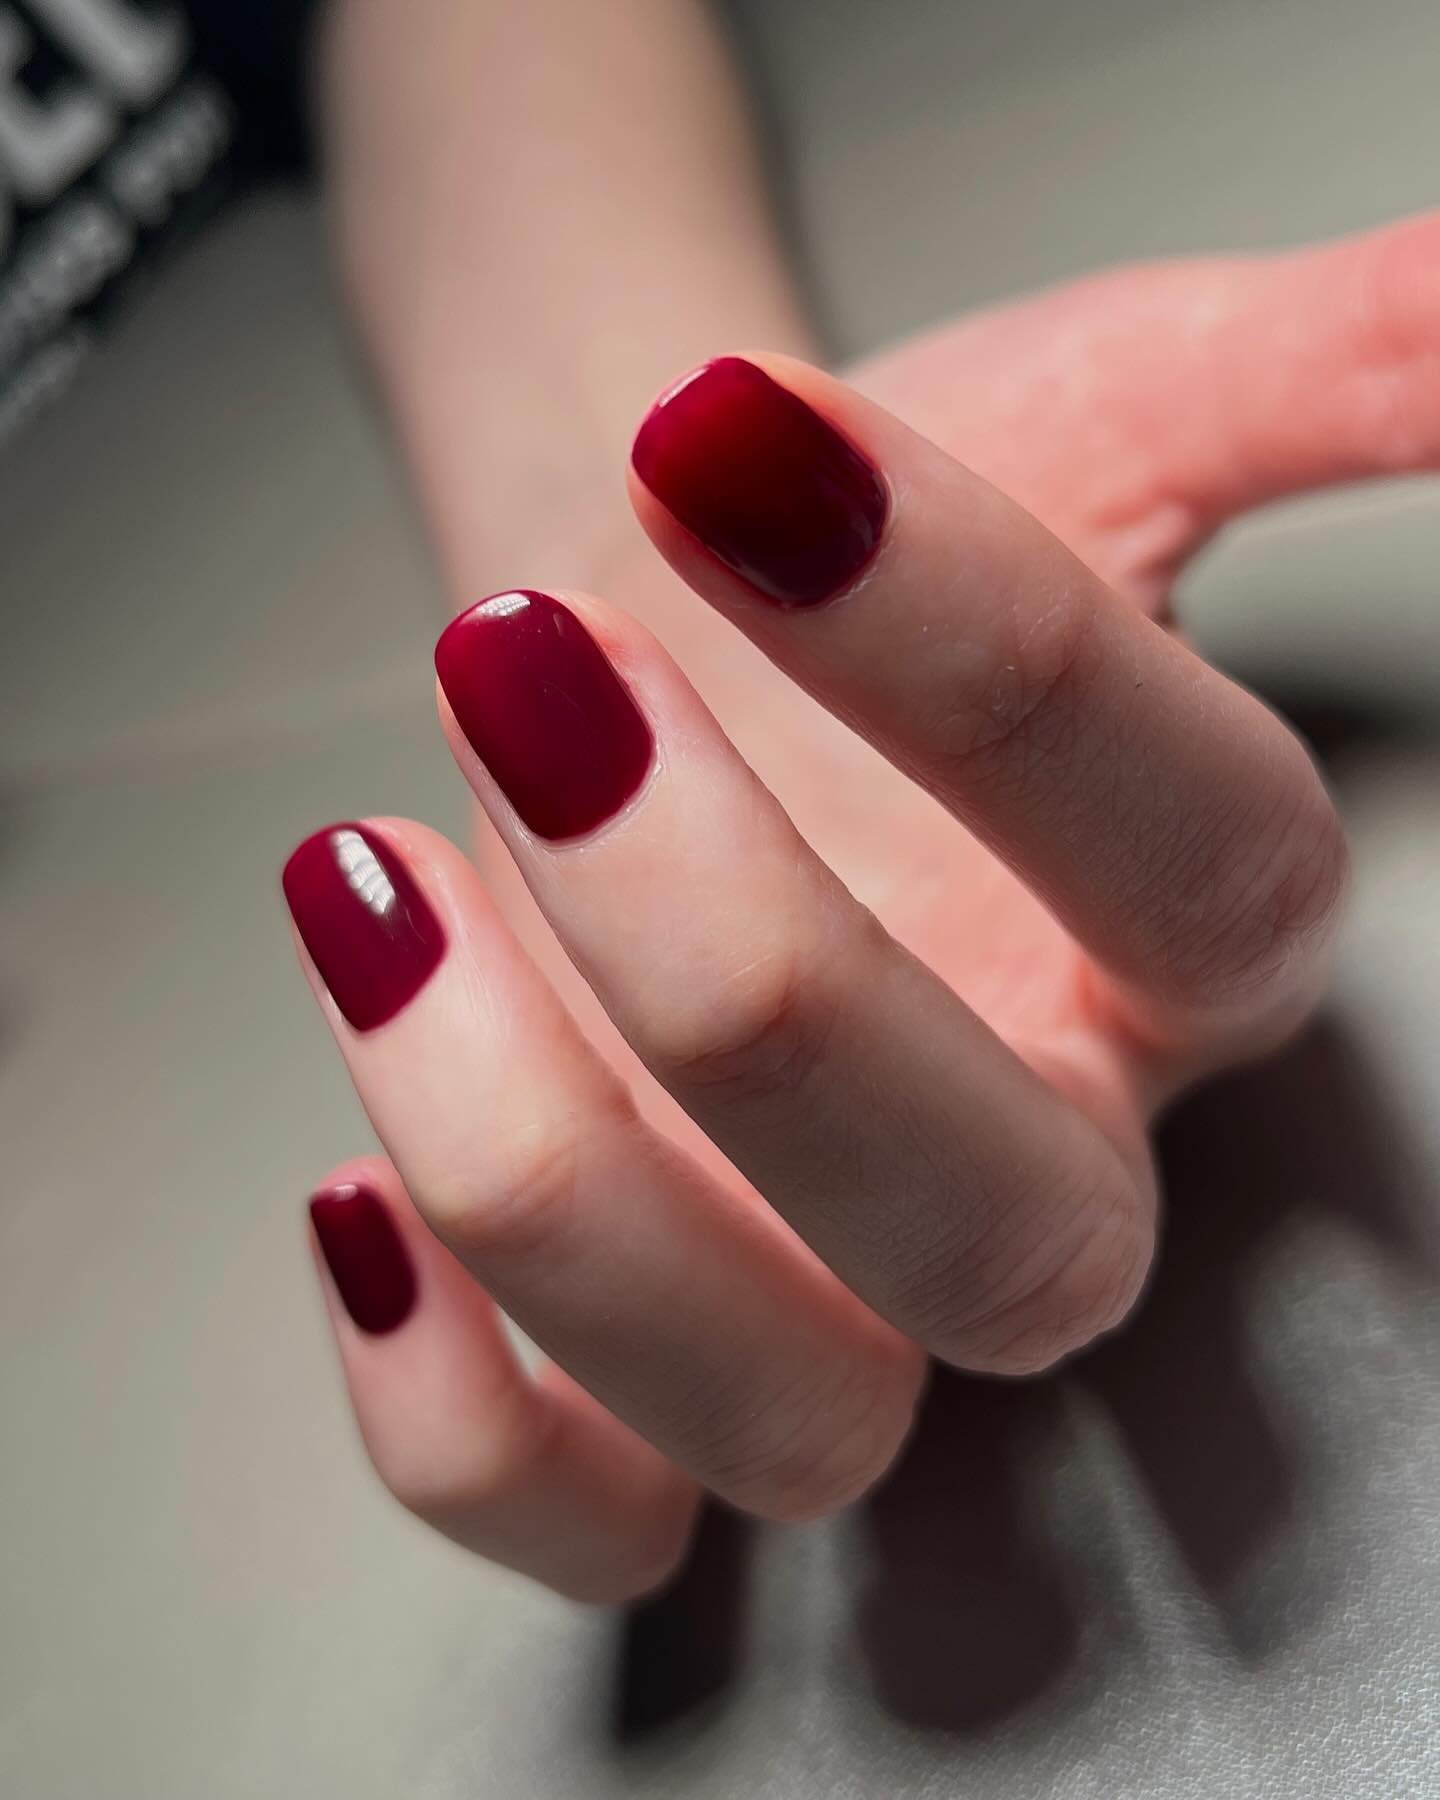 Ruby Ruby Ruby Ruby ahaahahaahaaaaah! 🎶

Sorry, whenever I paint this gorgeous colour, I have this song in my head! 

Using @biosculpturegelgb 
Ruby!

Also in my trusty kitbag I use @elim_uk @labology3 @lucypastorellitools_ @officialnavyprofessional